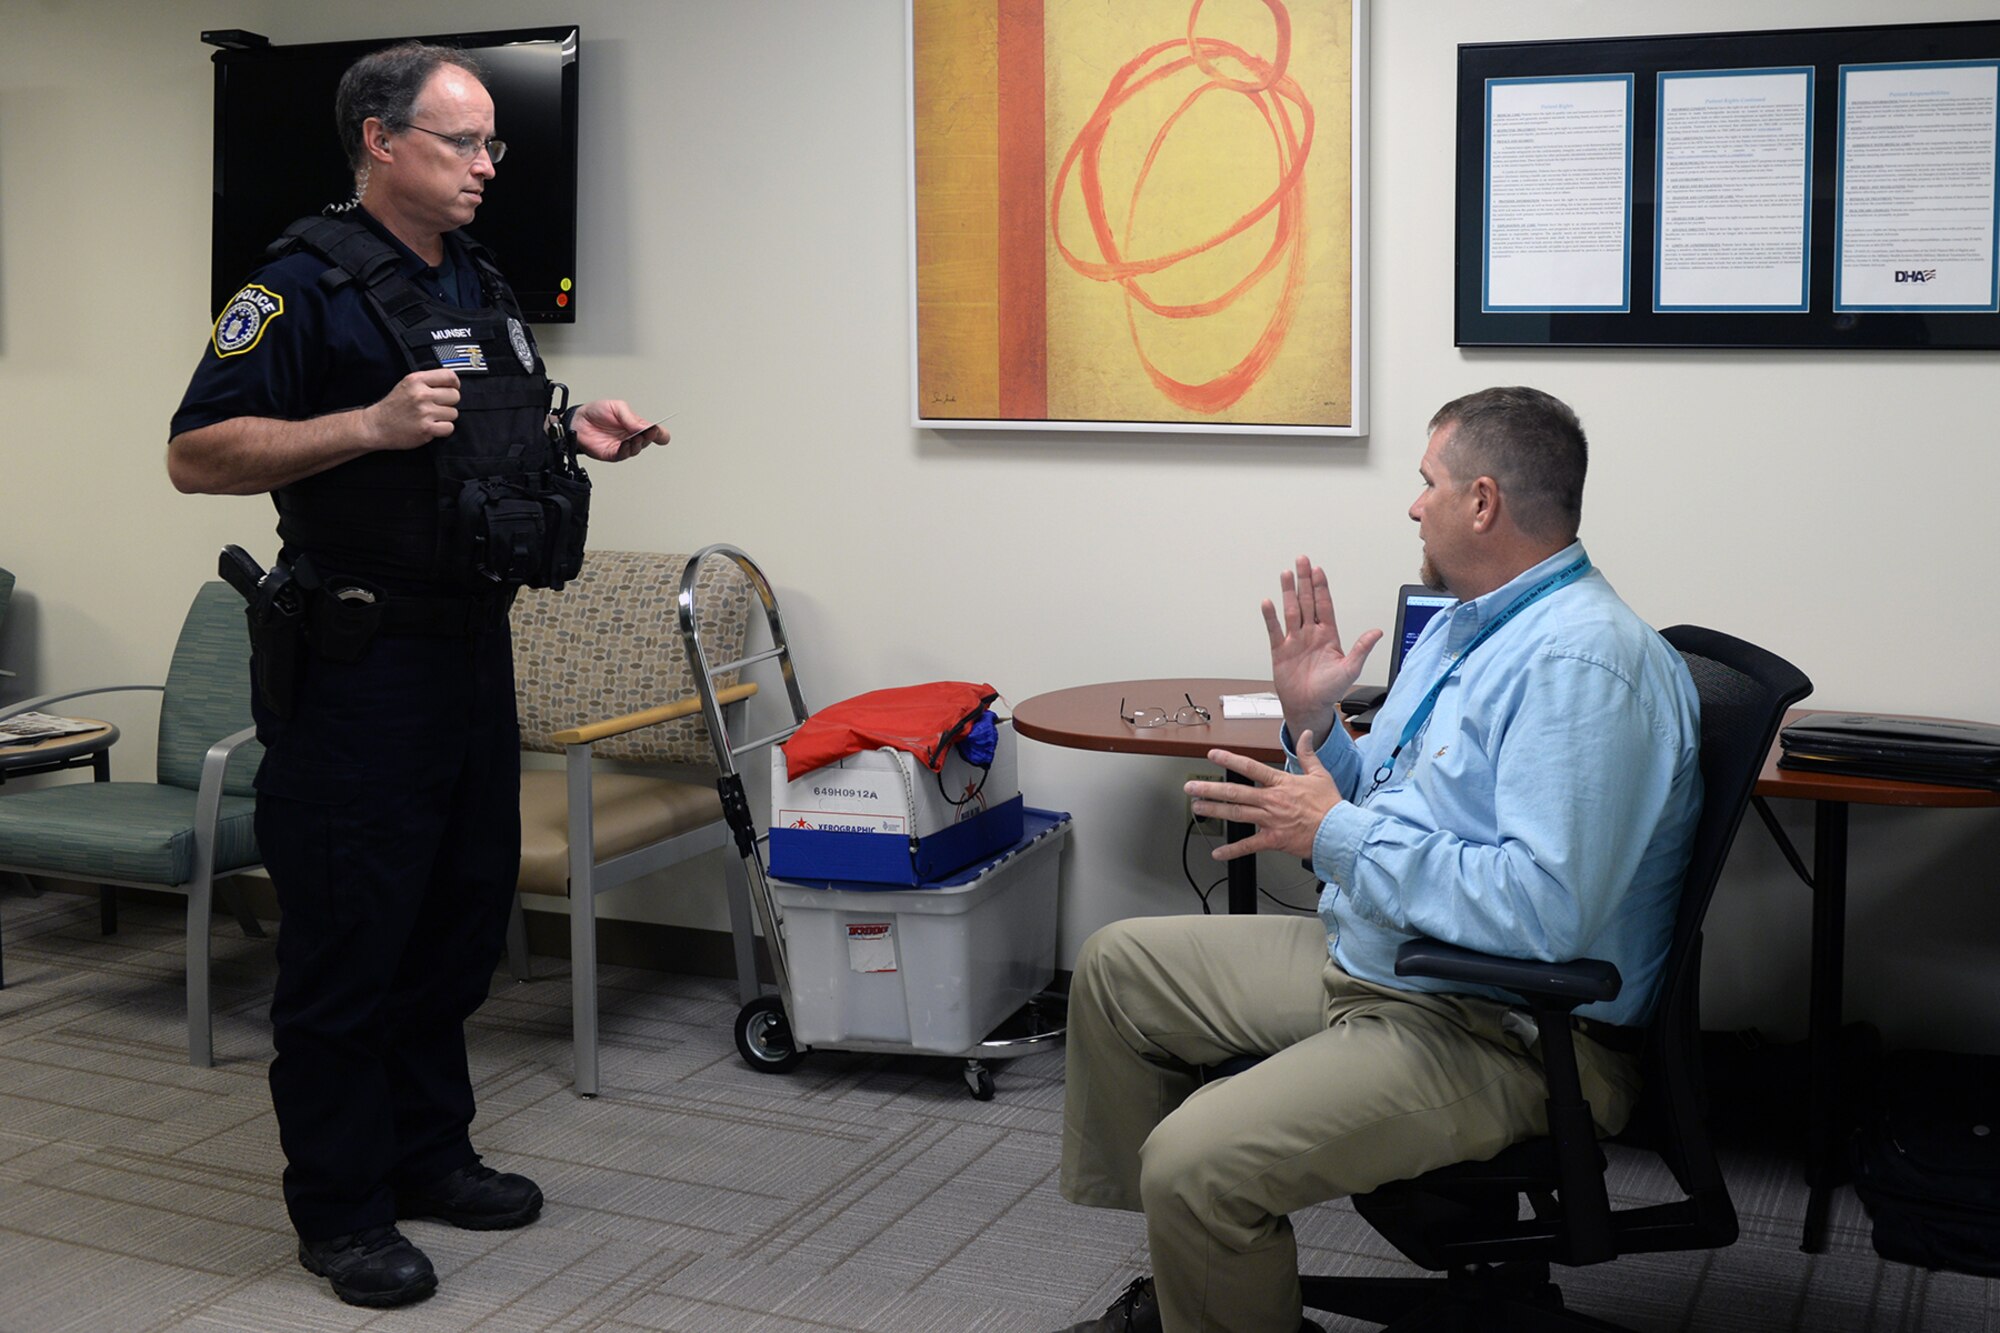 David Conrad VA outreach coordinator sits right and speaks to Police officer James Munsey about VA benefits.